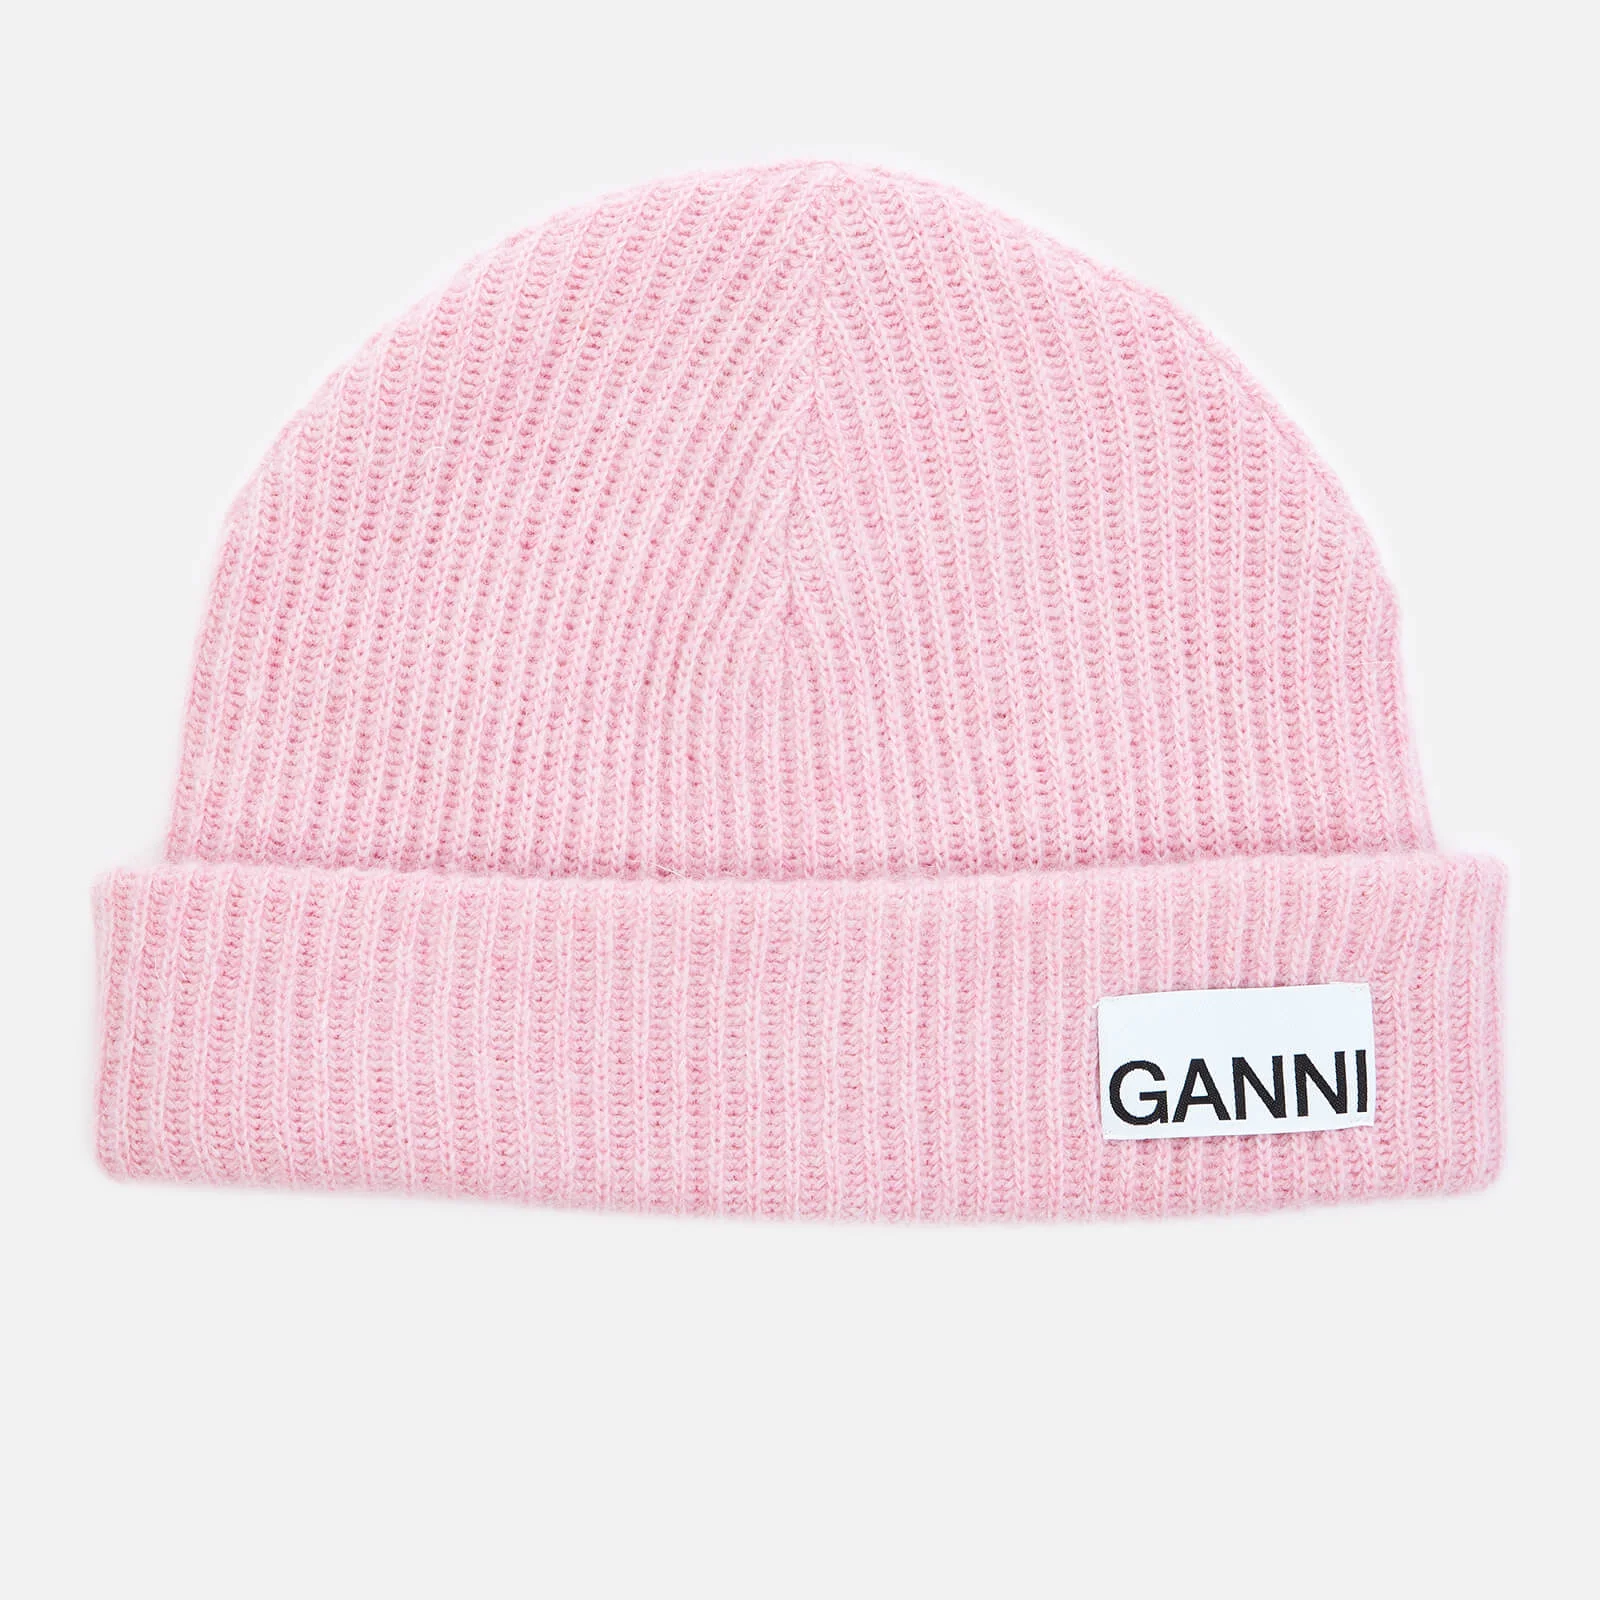 Ganni Women's Recycled Wool Knit Beanie - Sweet Lilac Image 1